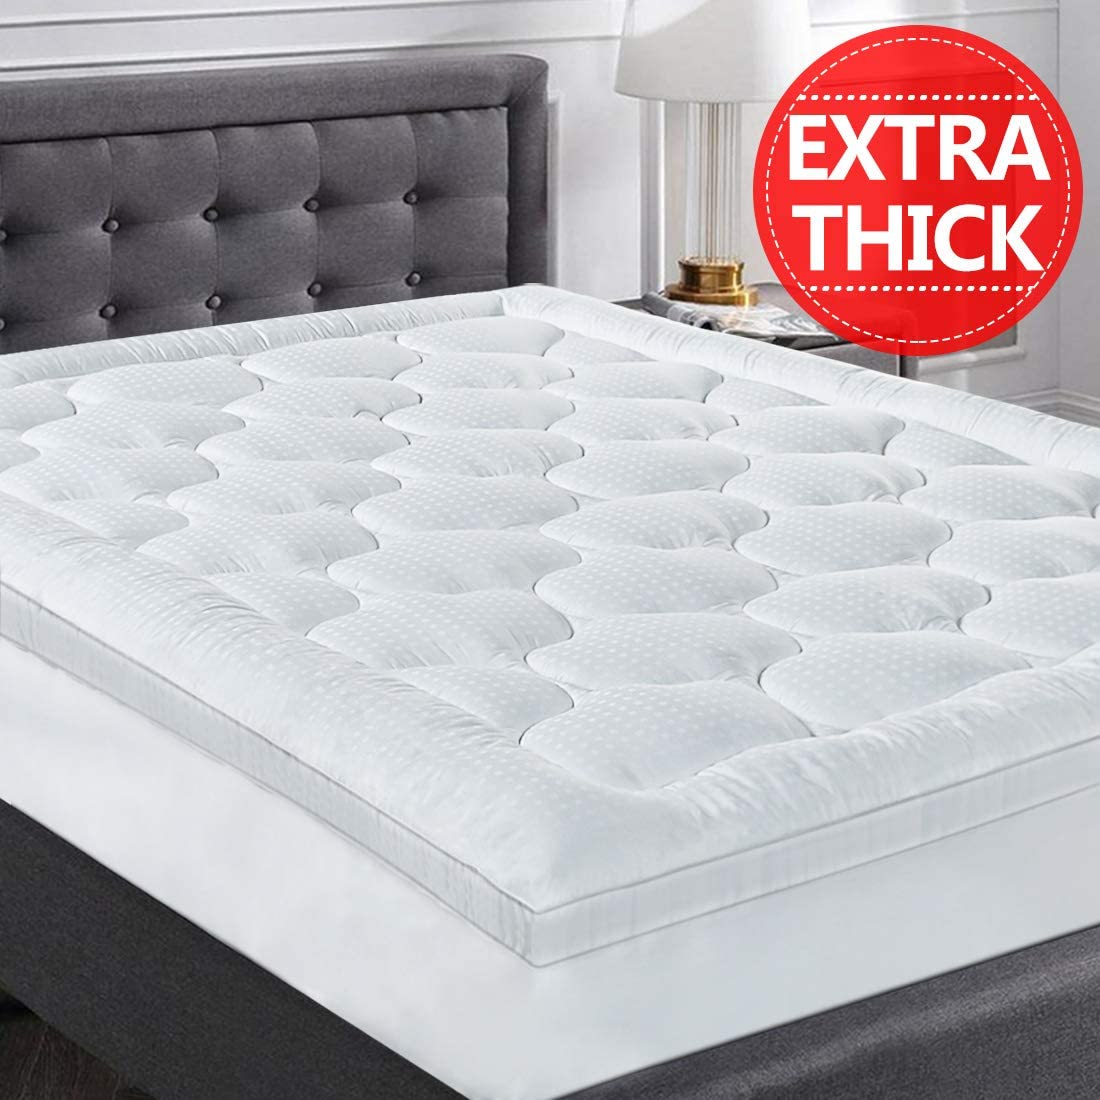 COHOME Twin Size Mattress Topper Extra Thick Cooling ...